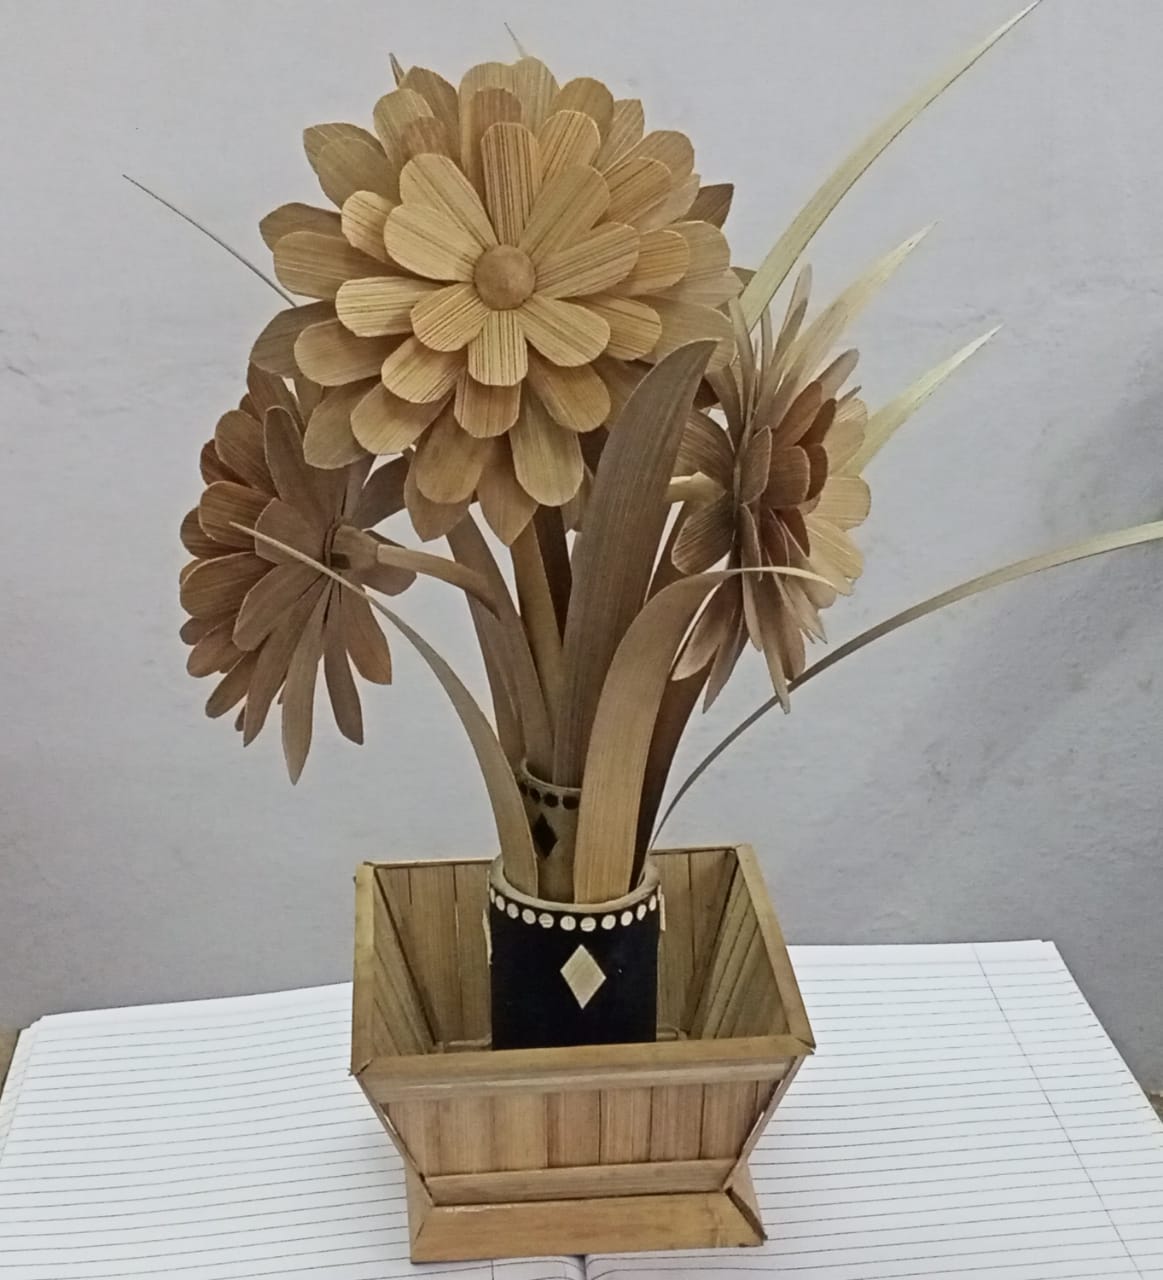 Bamboo flower vase made by trainee